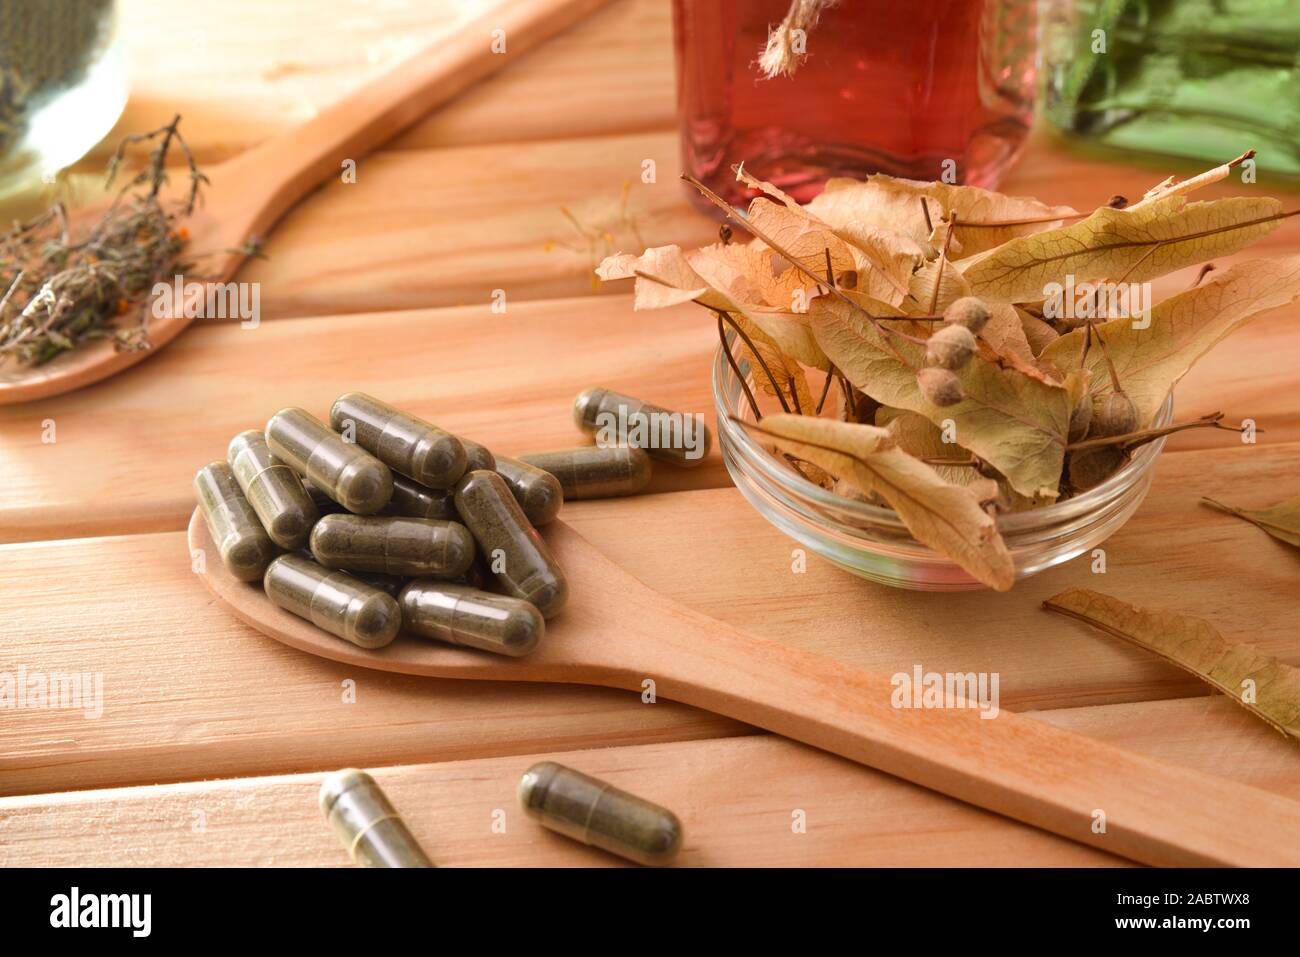 Capsules and bottles of essence of natural medicine with medicinal plants on wooden table. Elevated view. Horizontal composition. Stock Photo